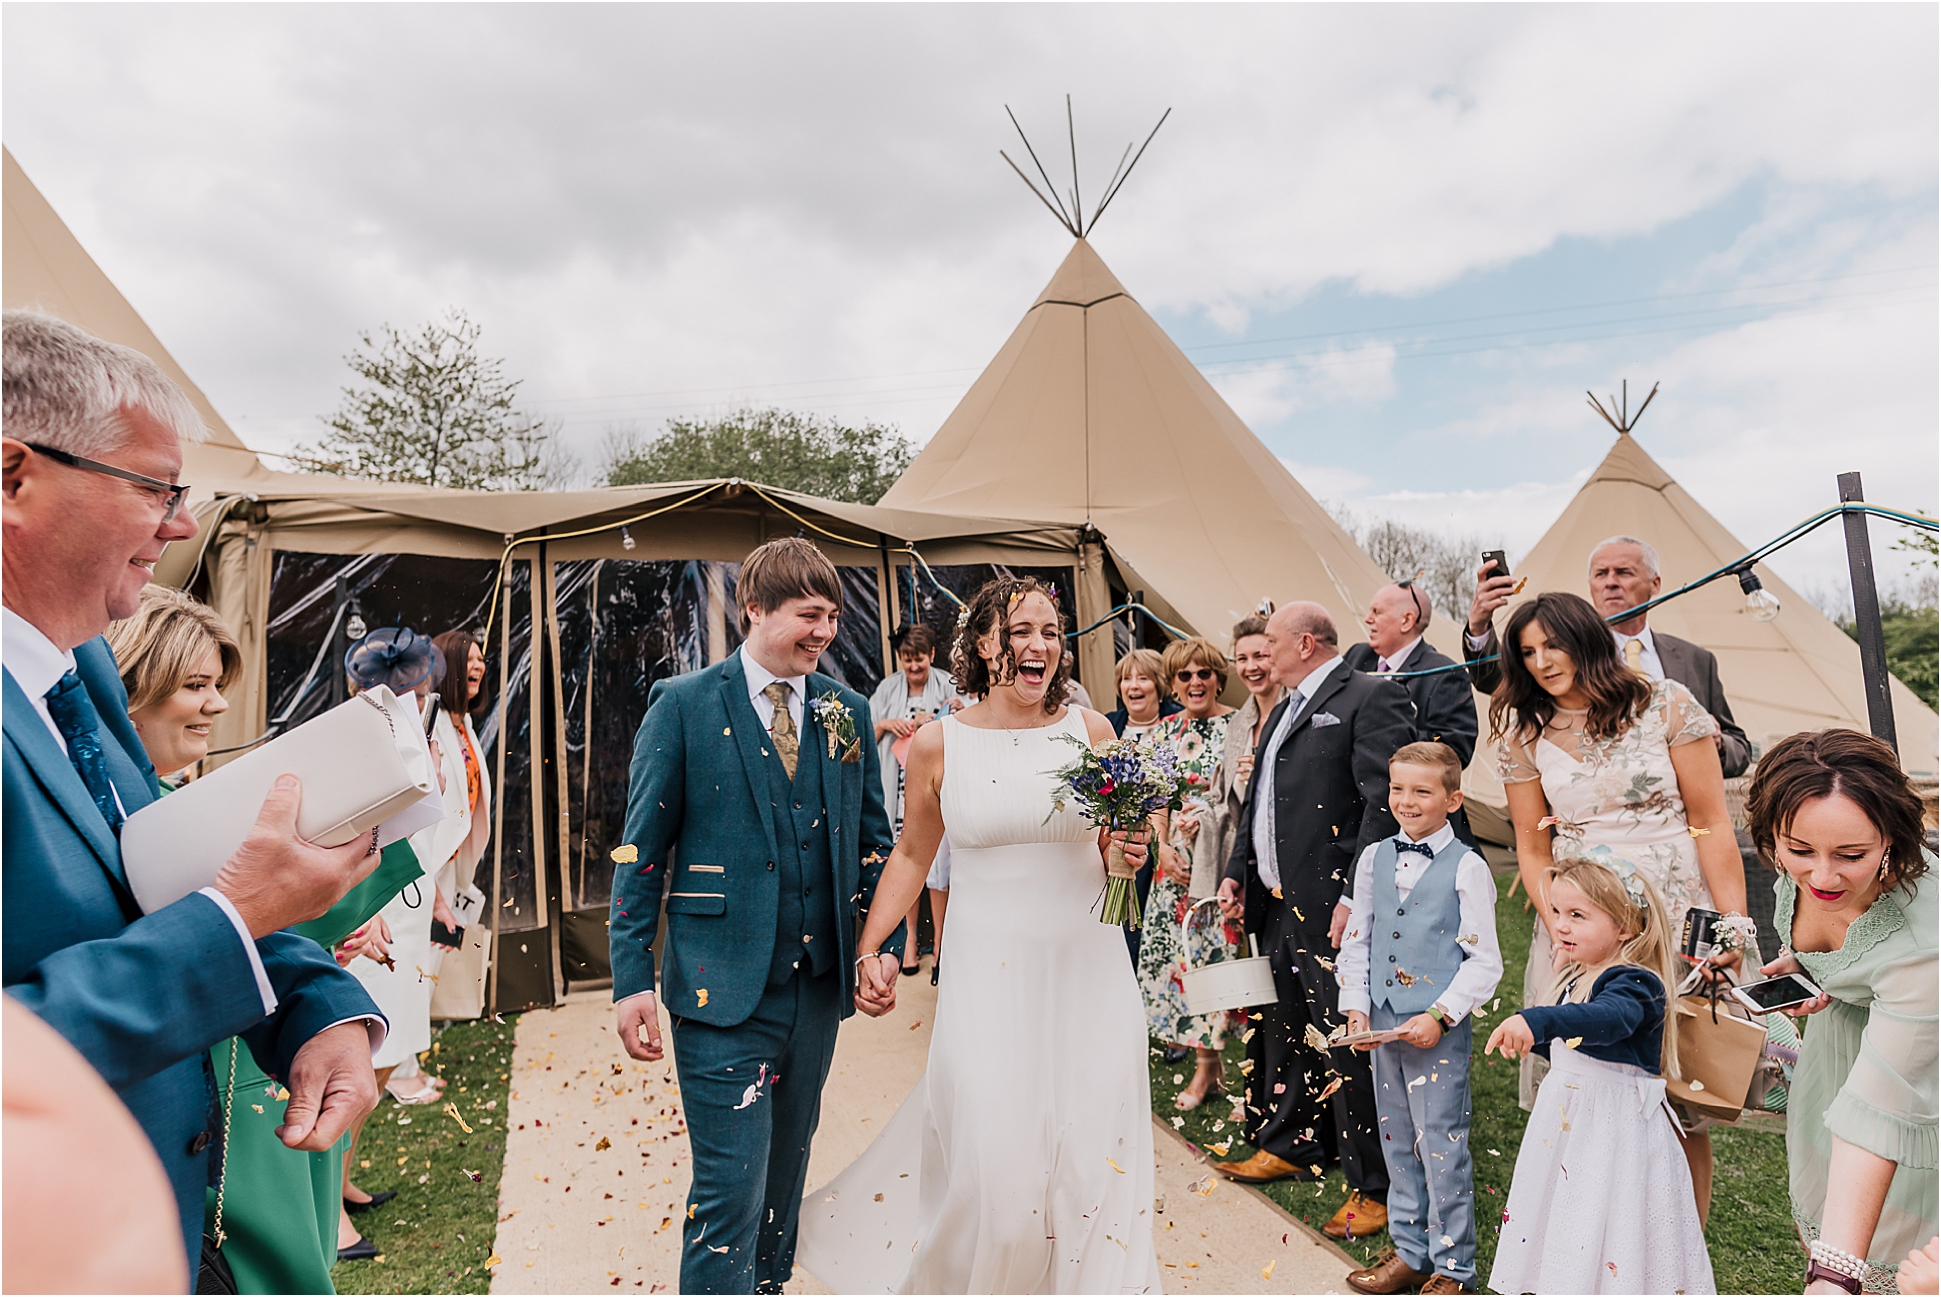 Ben and Ash – Tipi Wedding of awesomeness